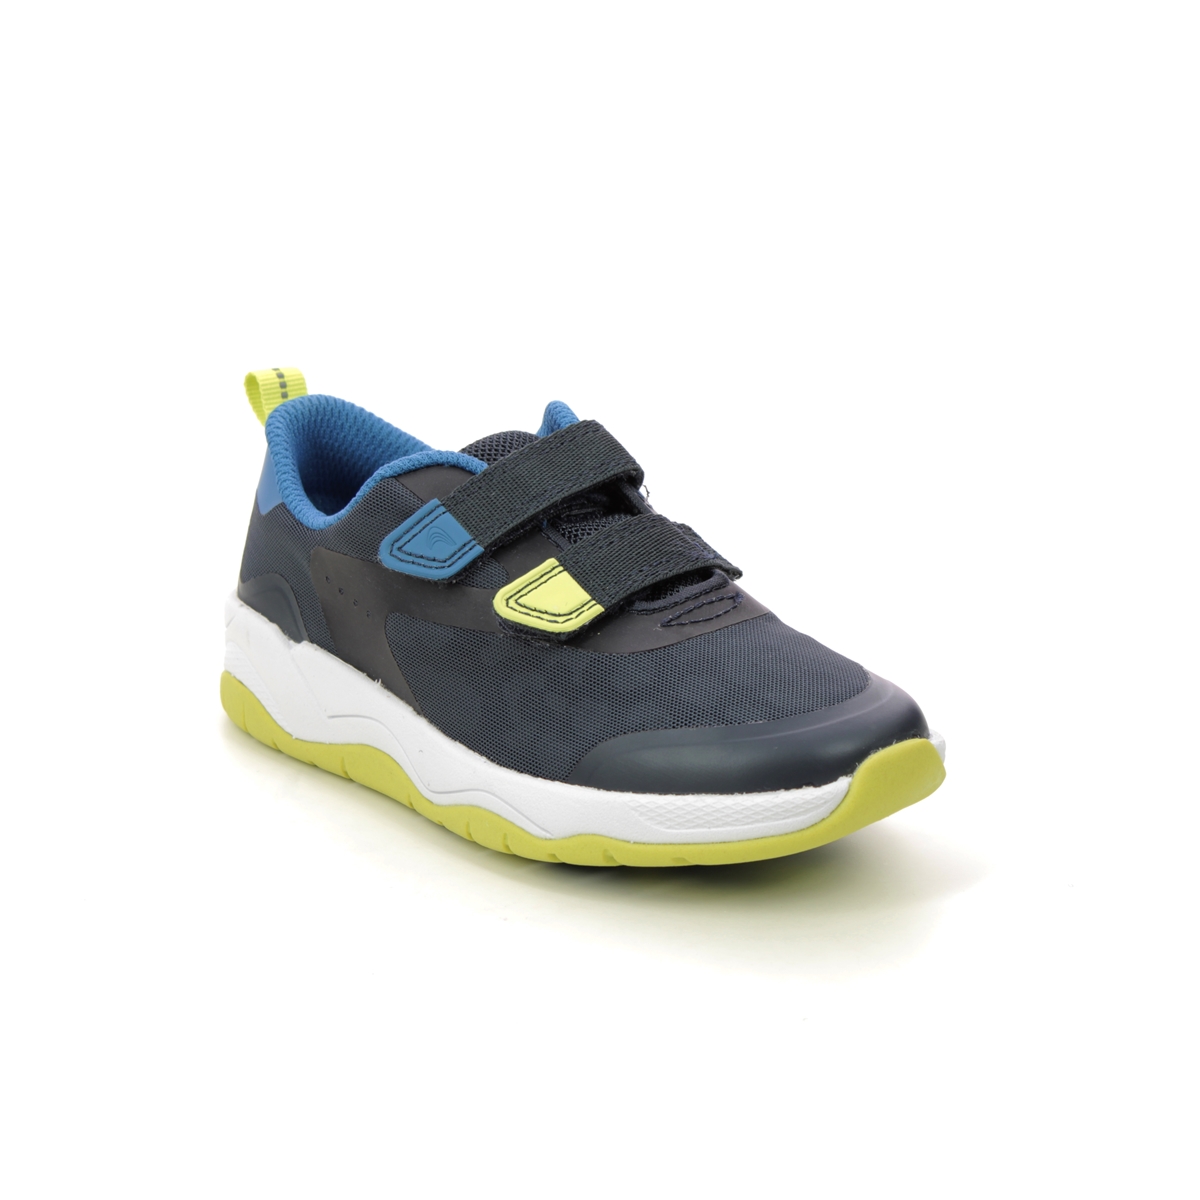 Clarks Clowder Race K Navy Kids Boys Trainers 6629-26F in a Plain Man-made in Size 7